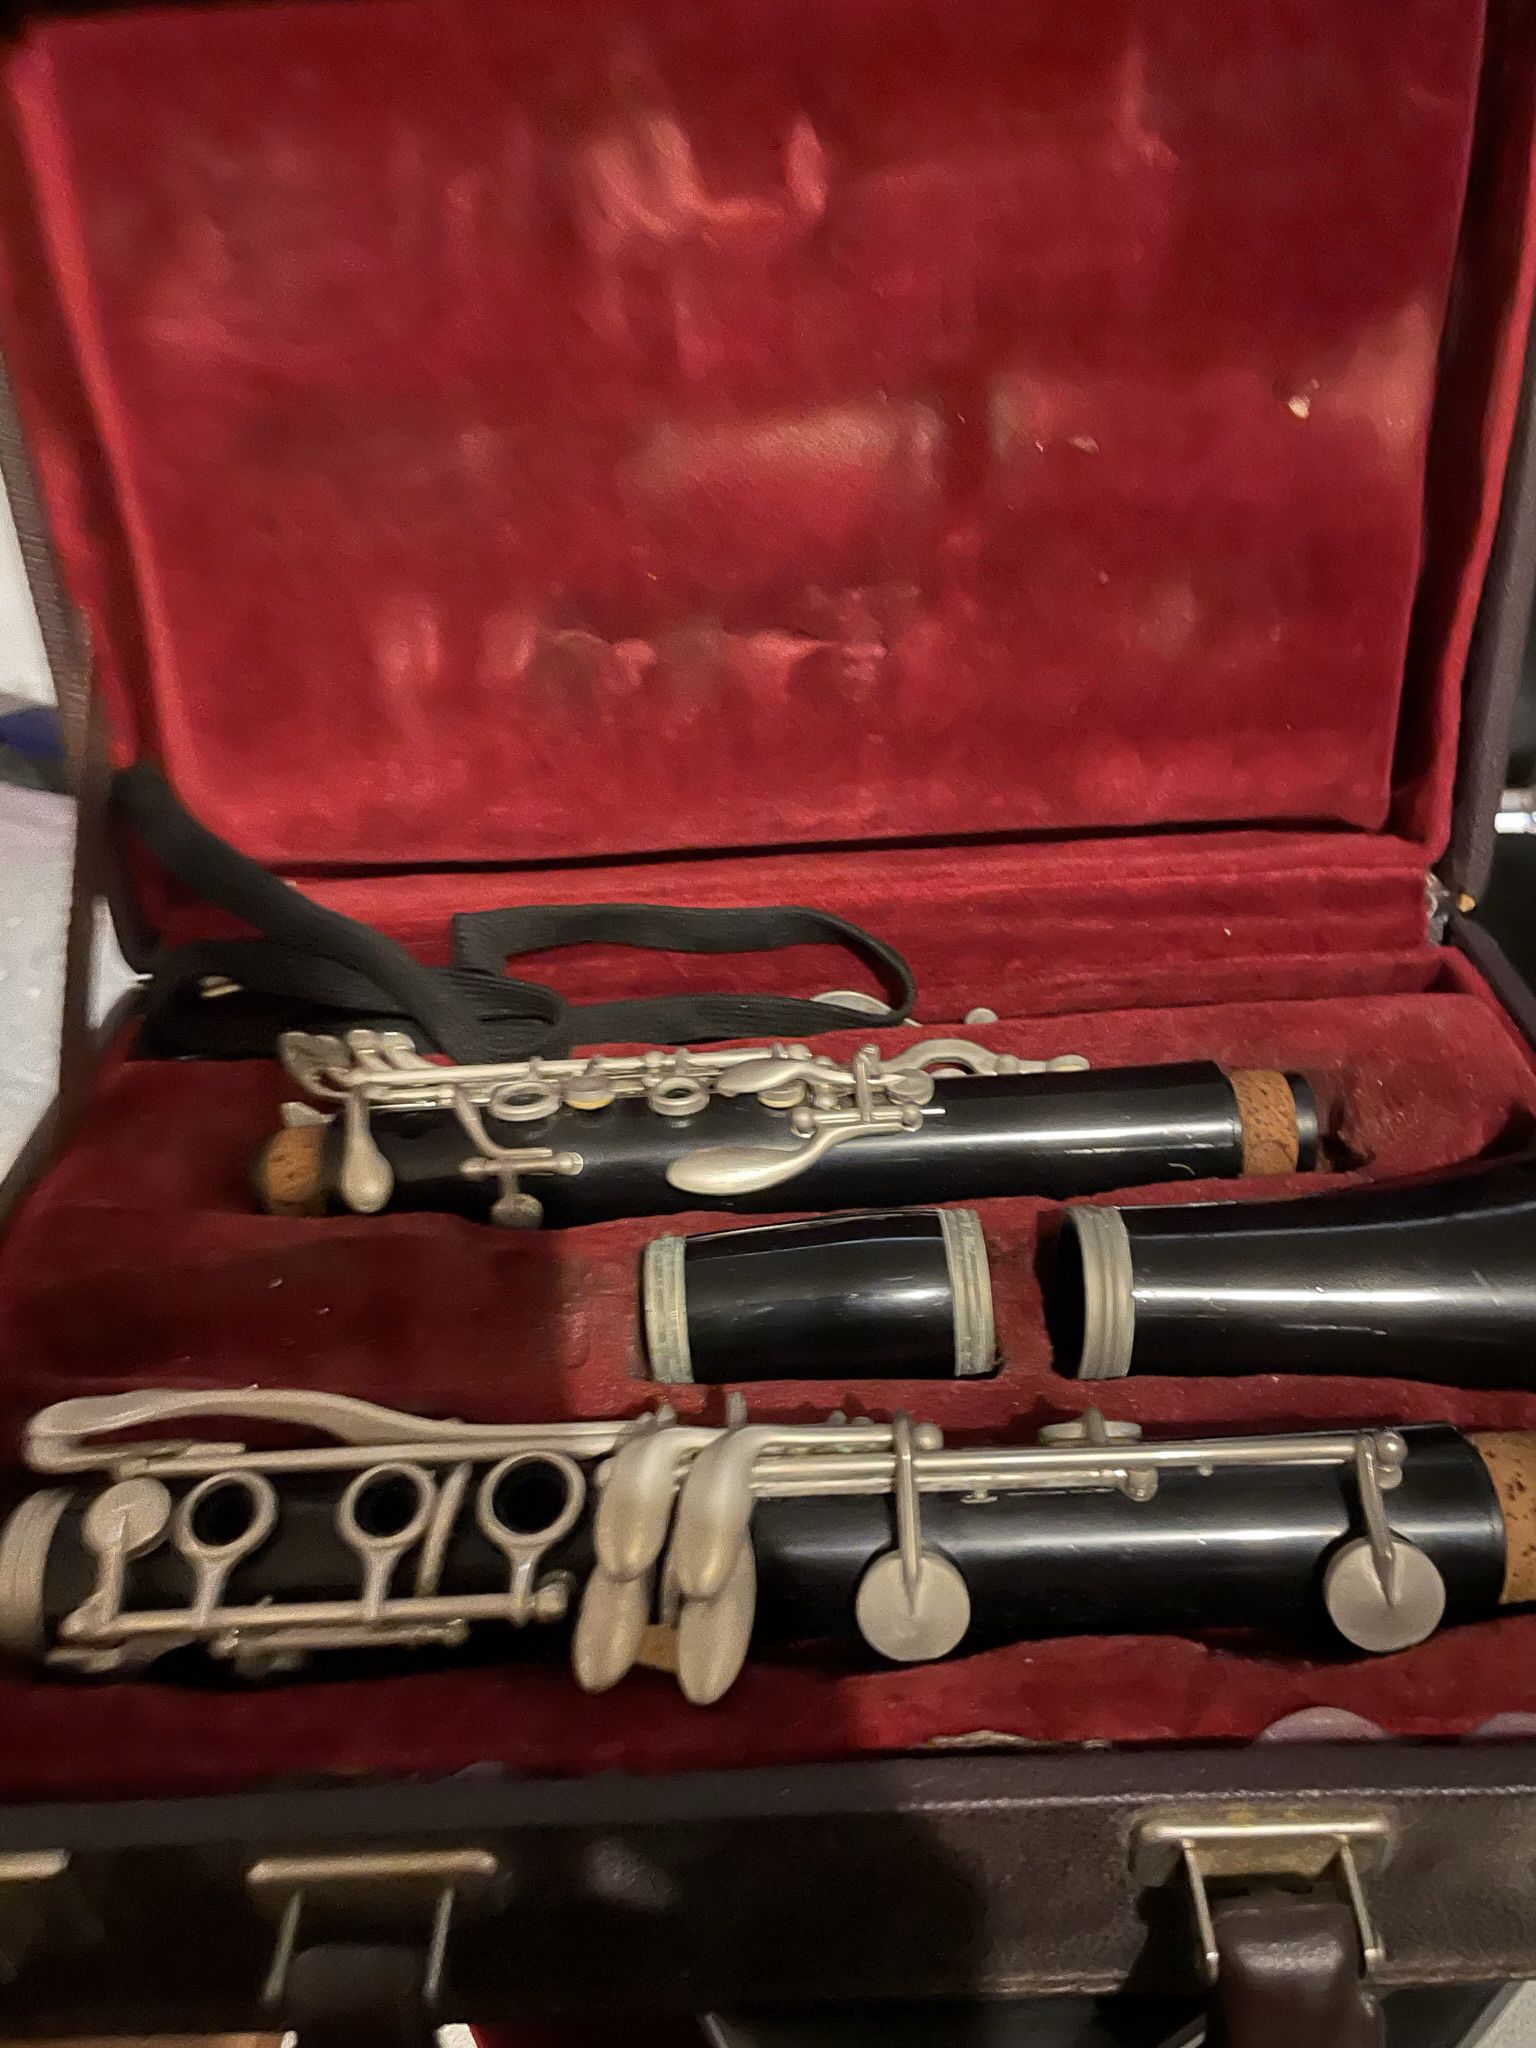 Old Clarinet - Missing Mouthpiece 